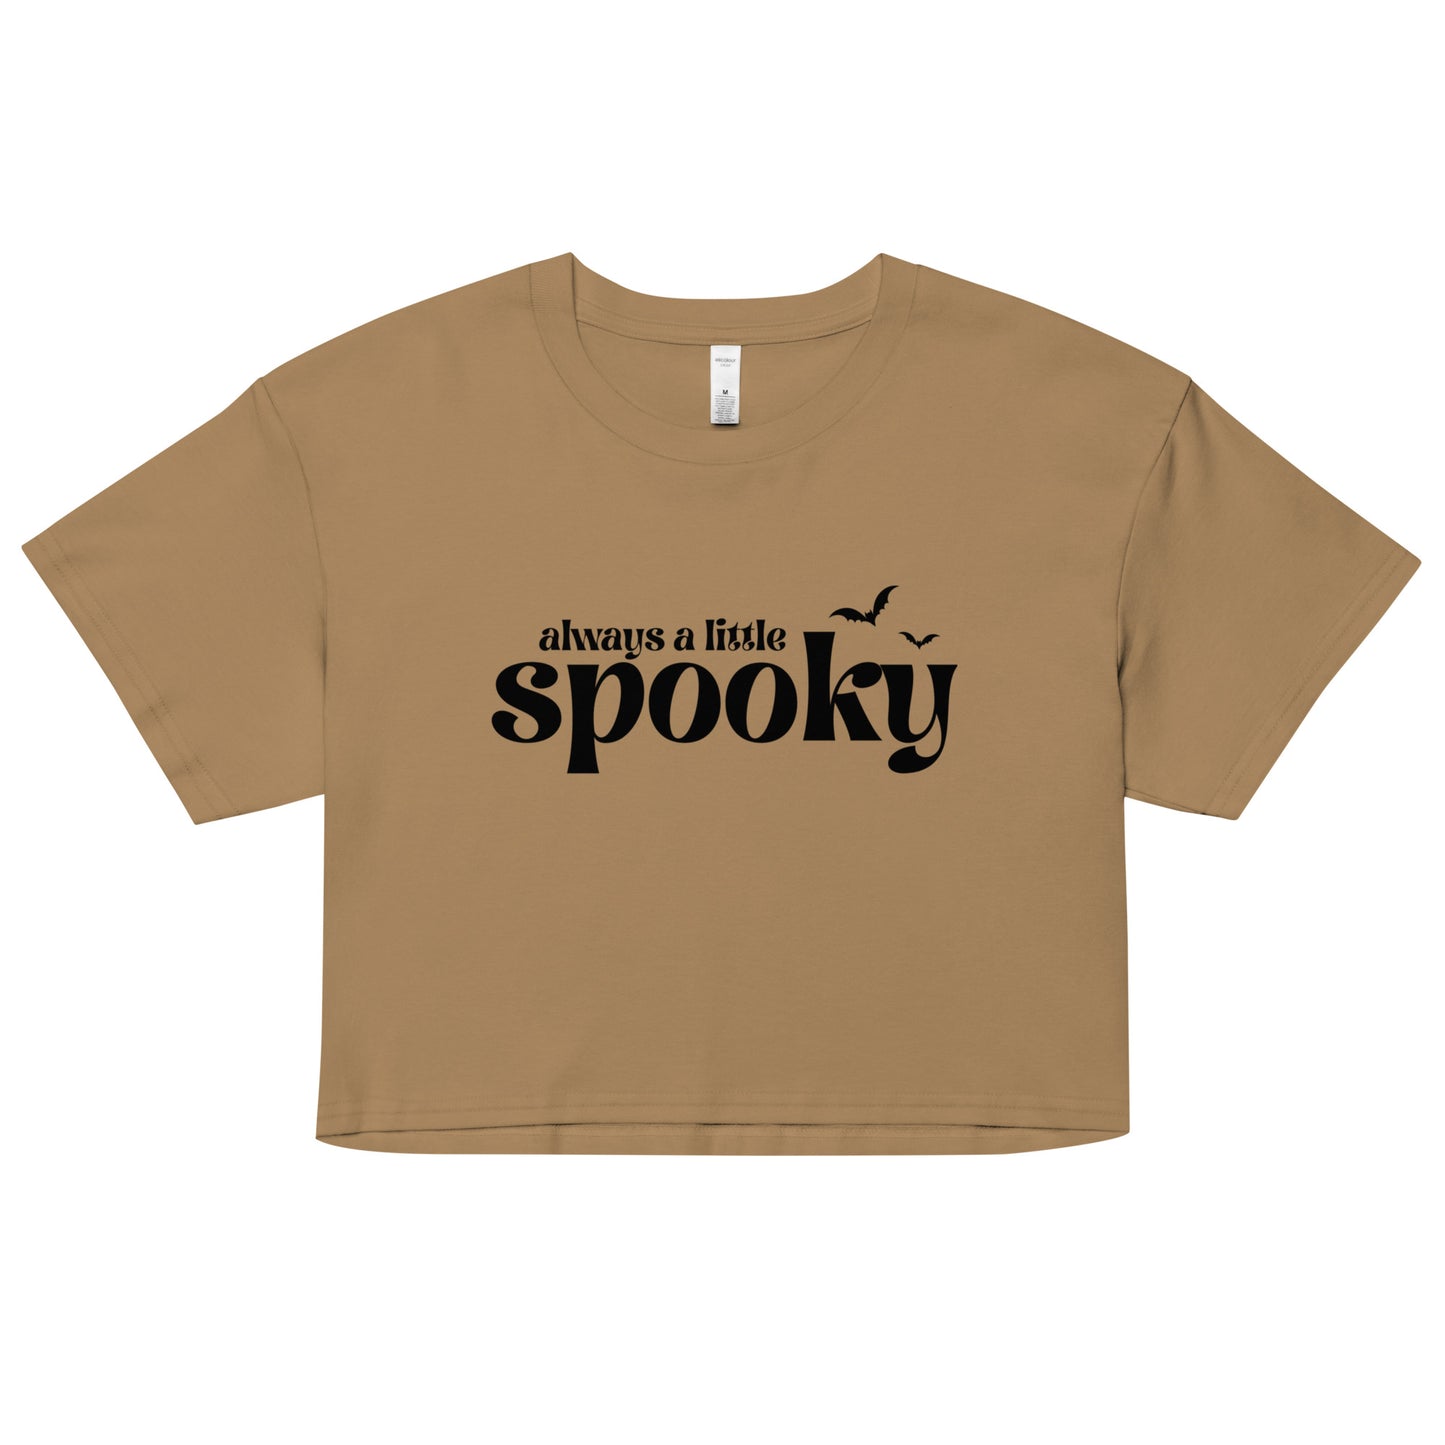 A tan, cropped t-shirt that says "always a little spooky" in a trendy black font